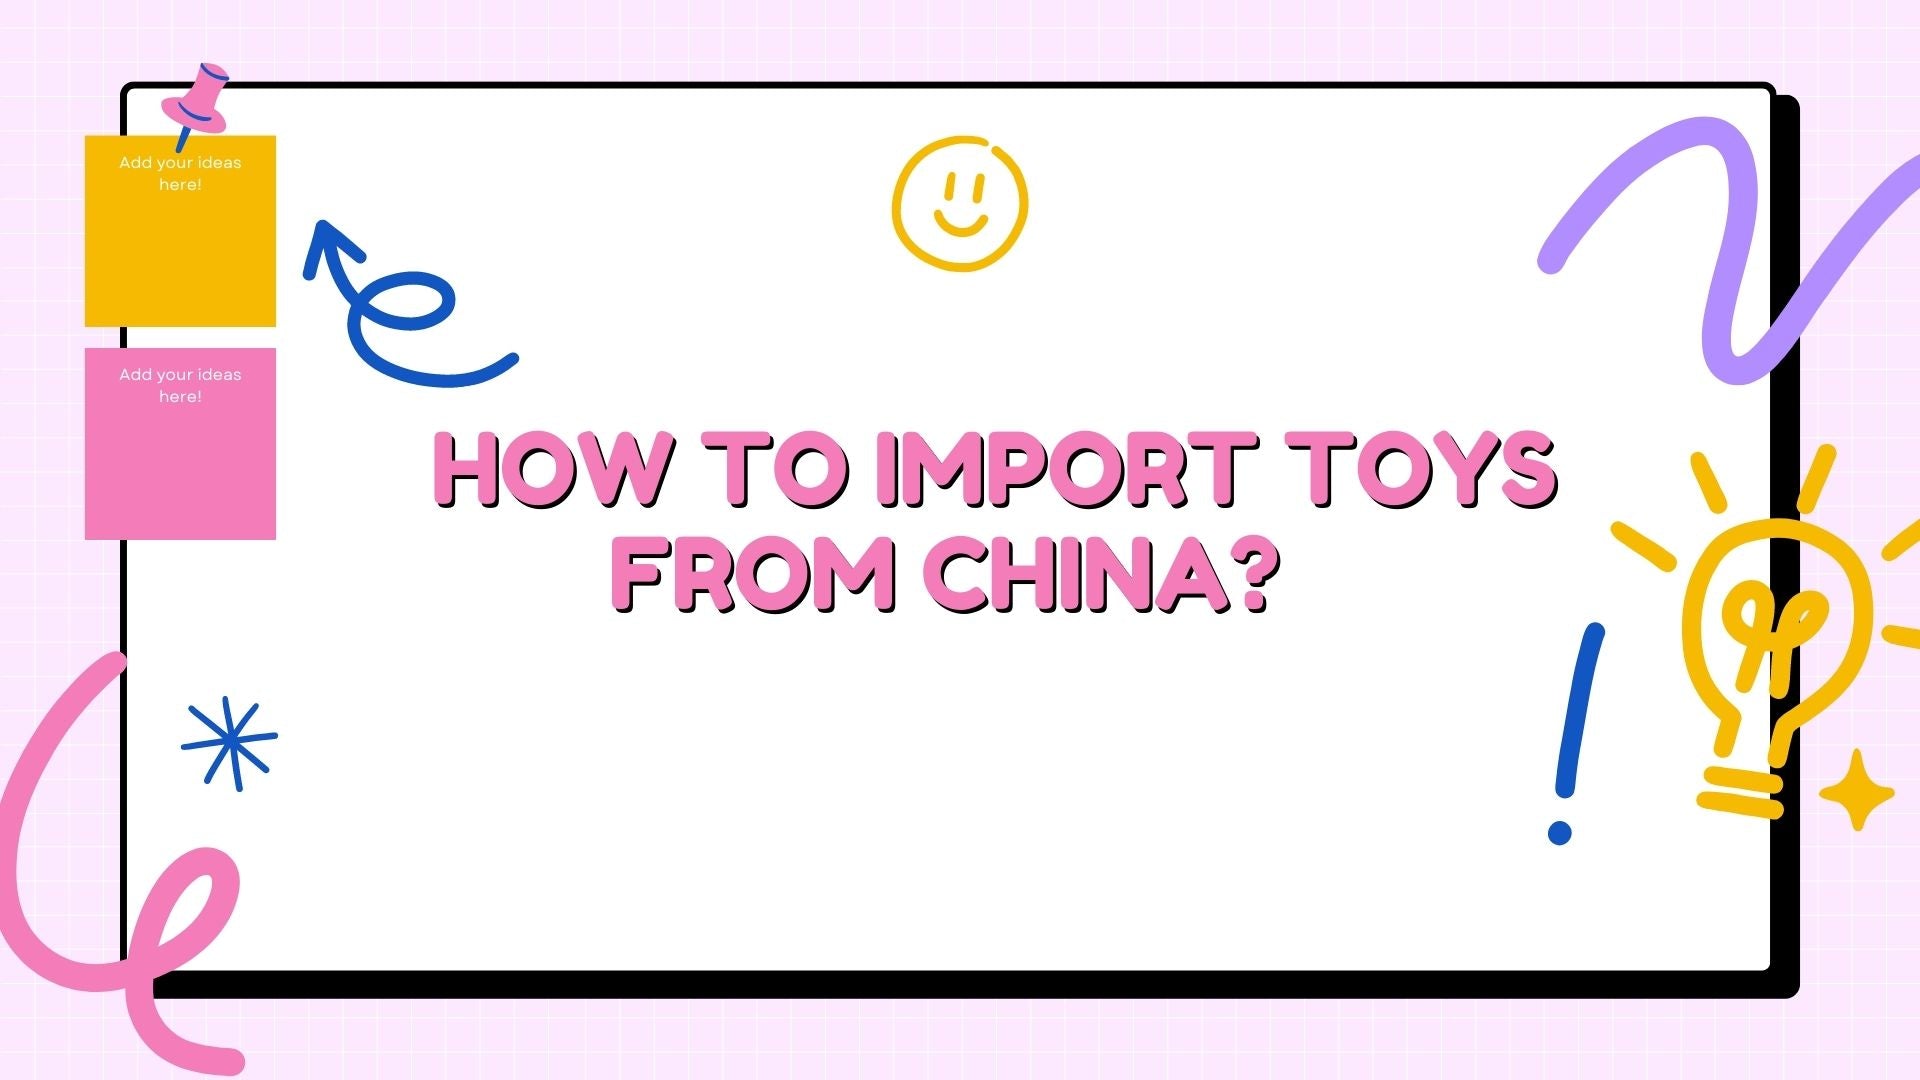 How to Import Toys from China?